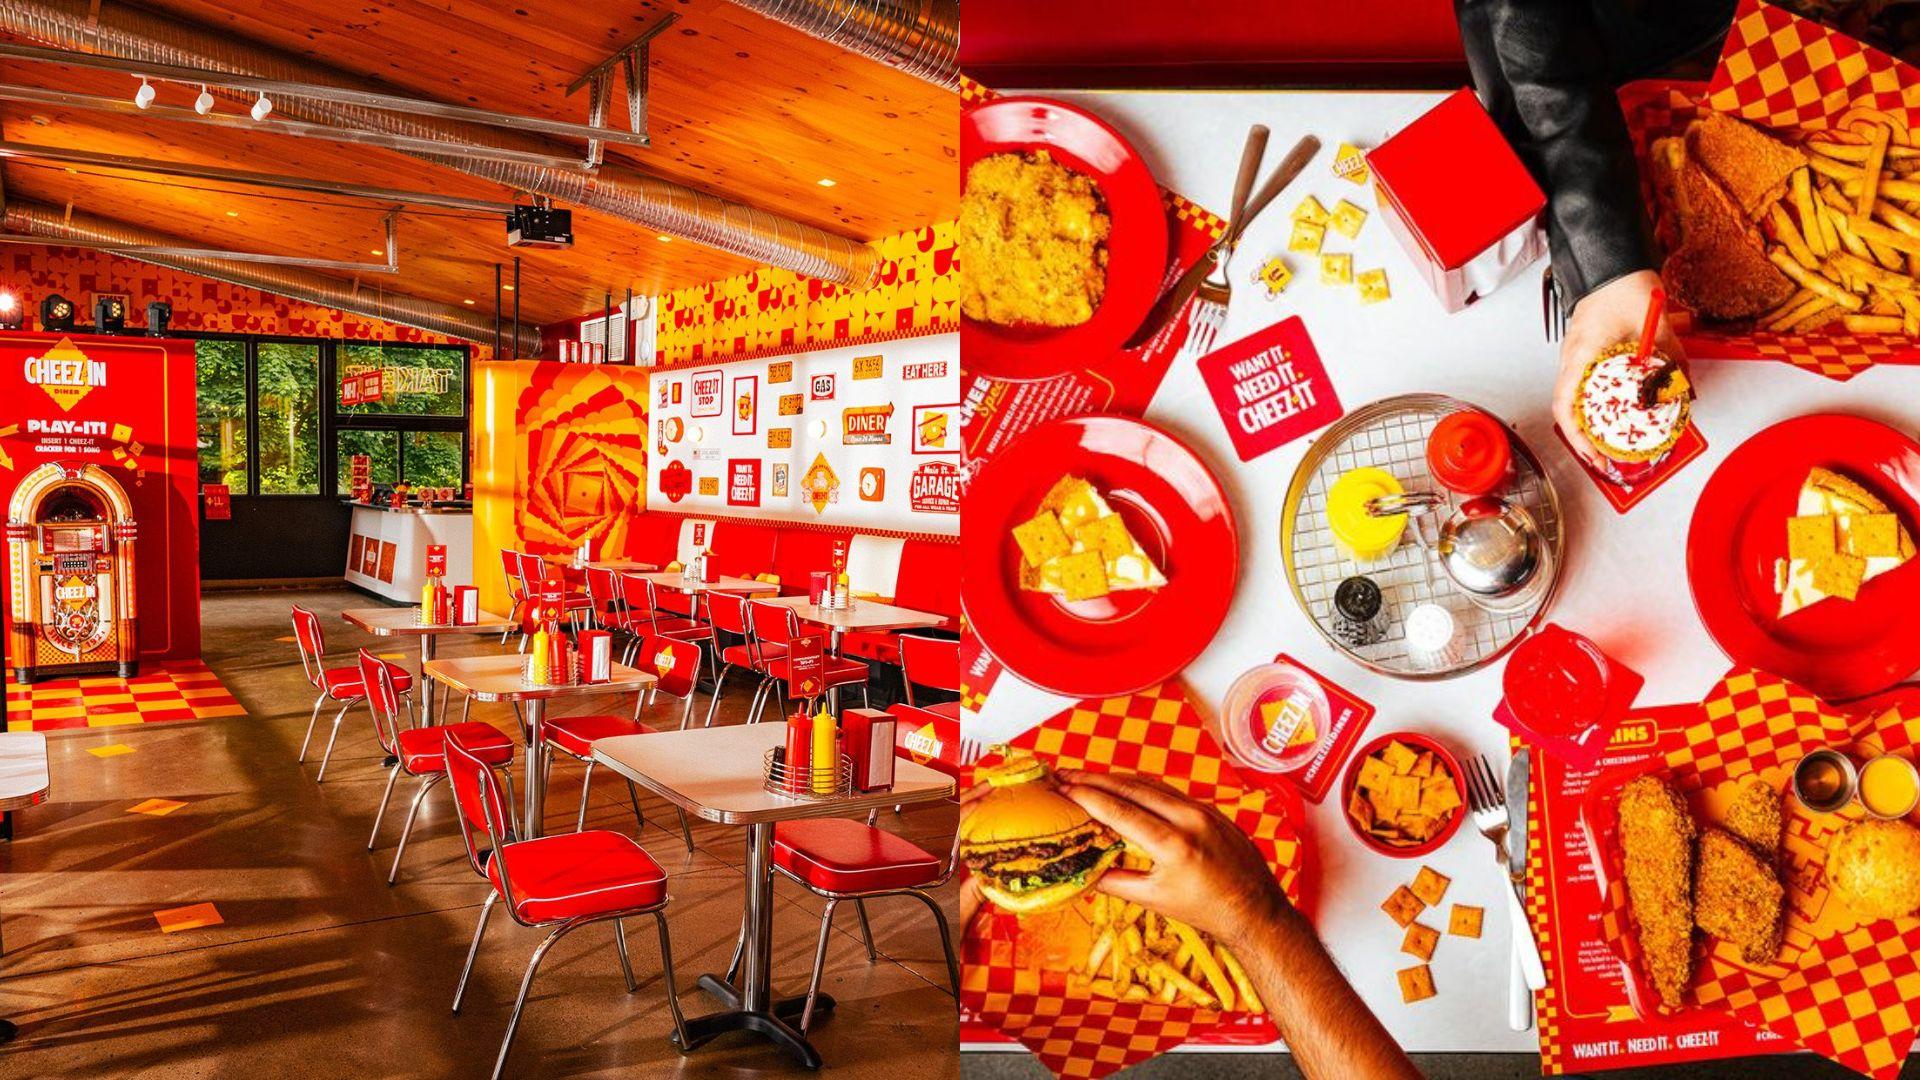 cheez-it diner interior and food